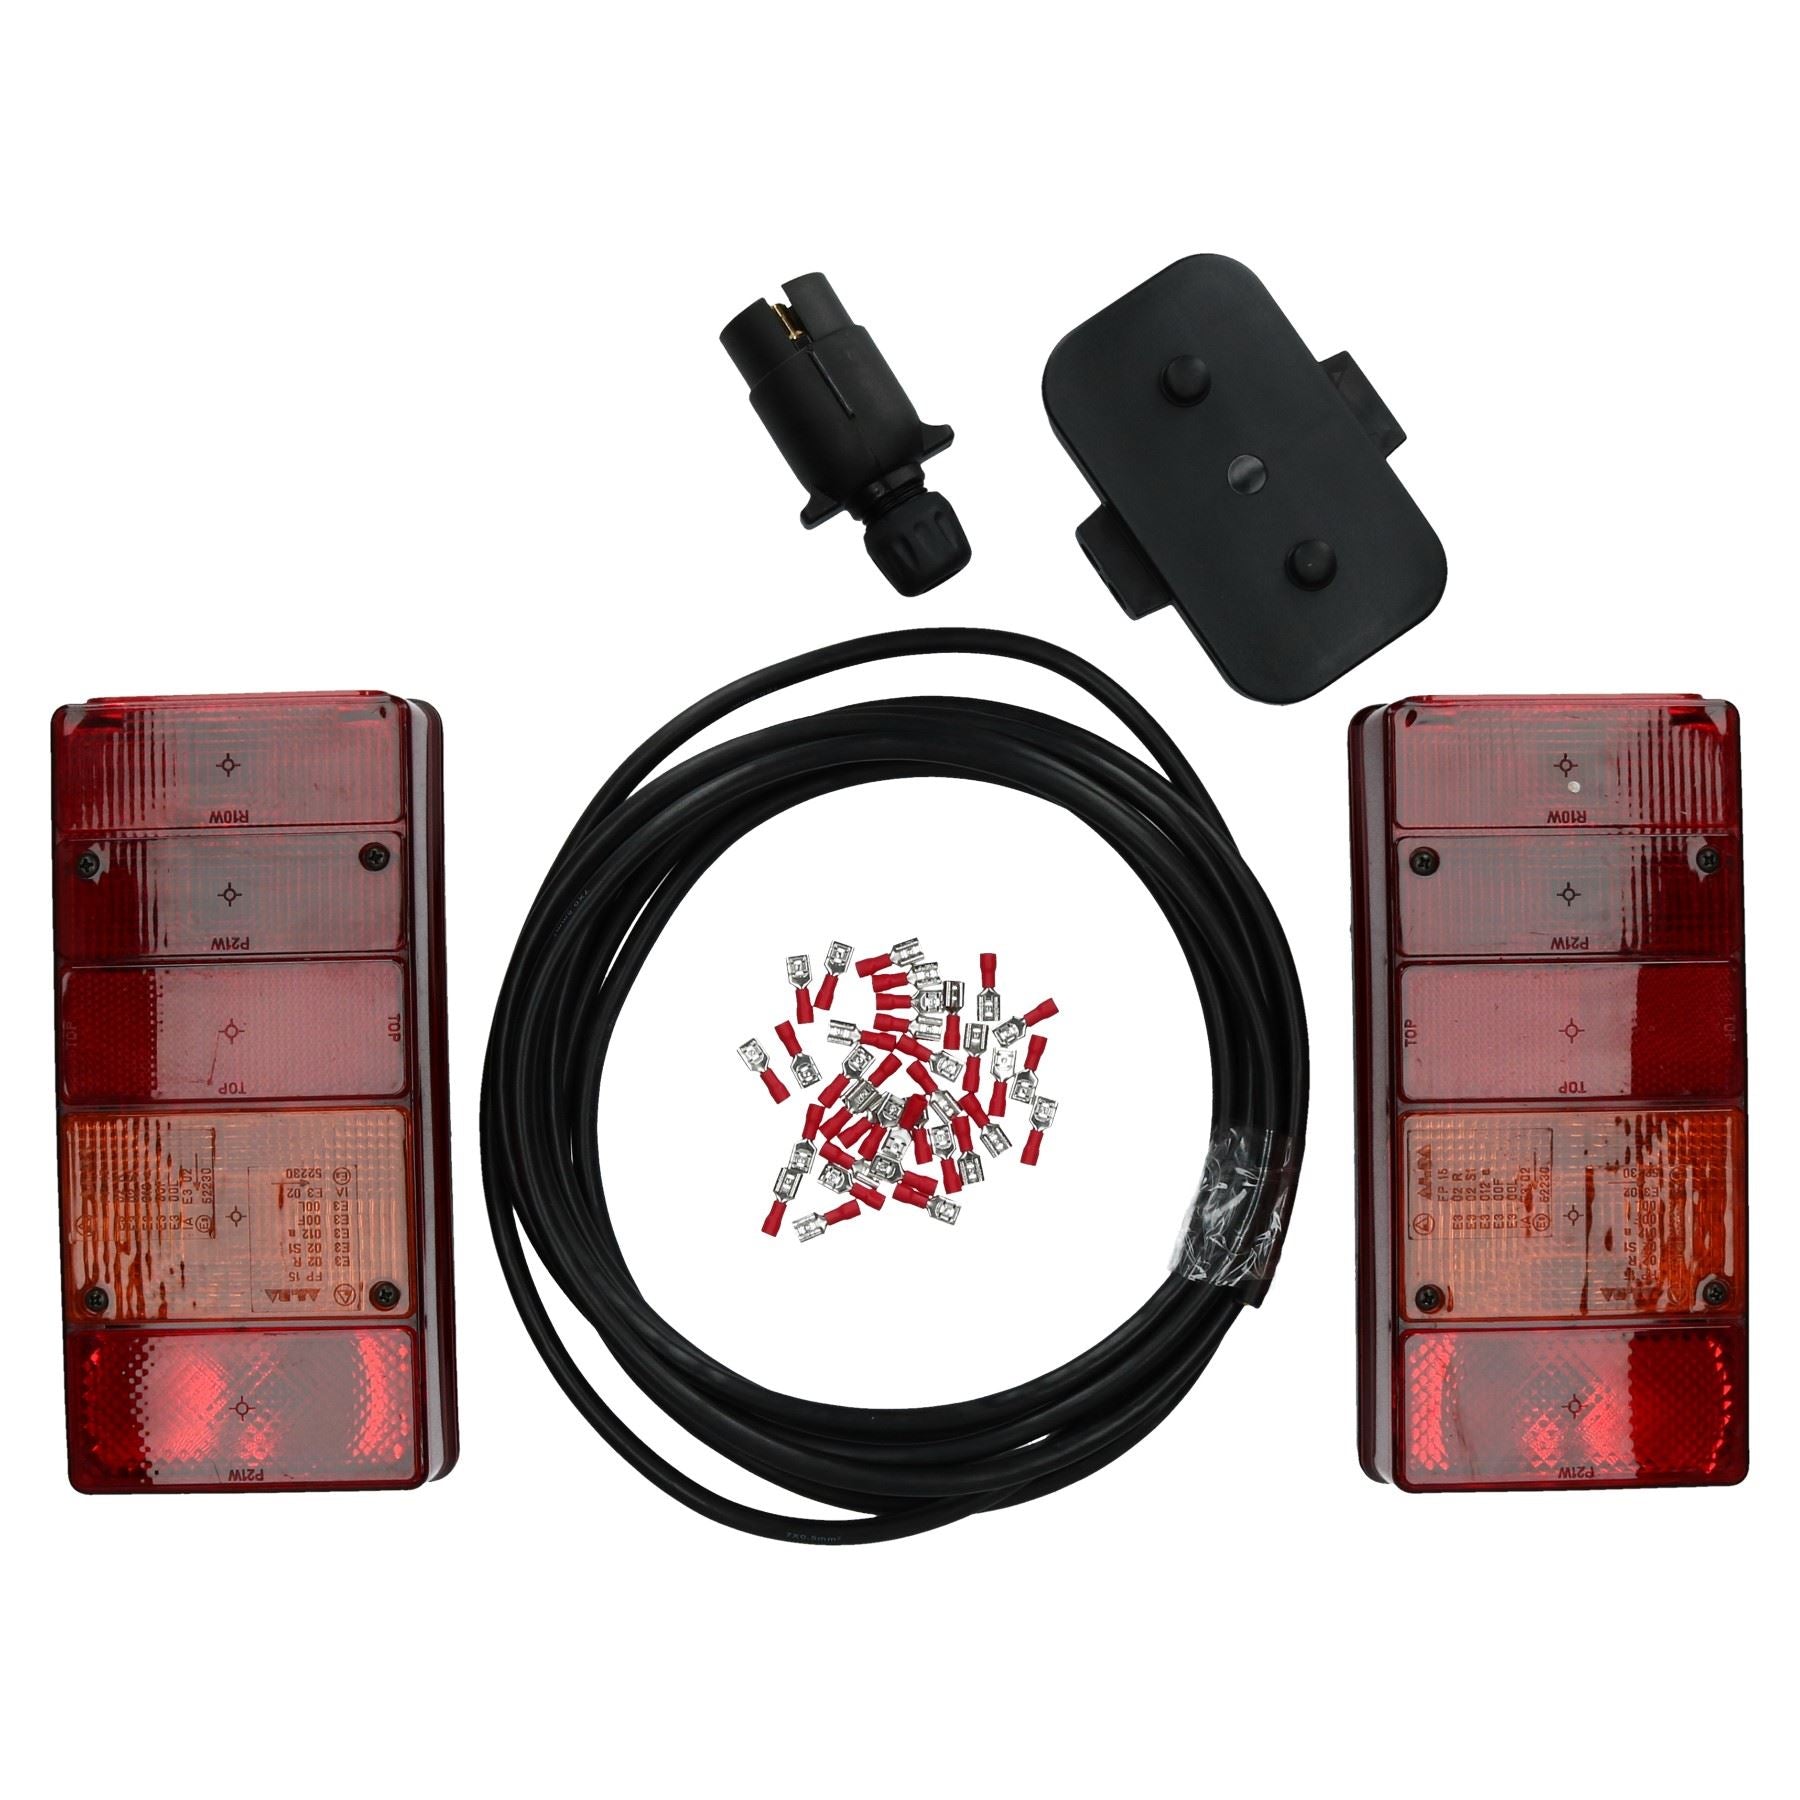 Trailer Light Wiring Kit - Large Lights, Plug, Junction Box, 5m Wire, Terminals